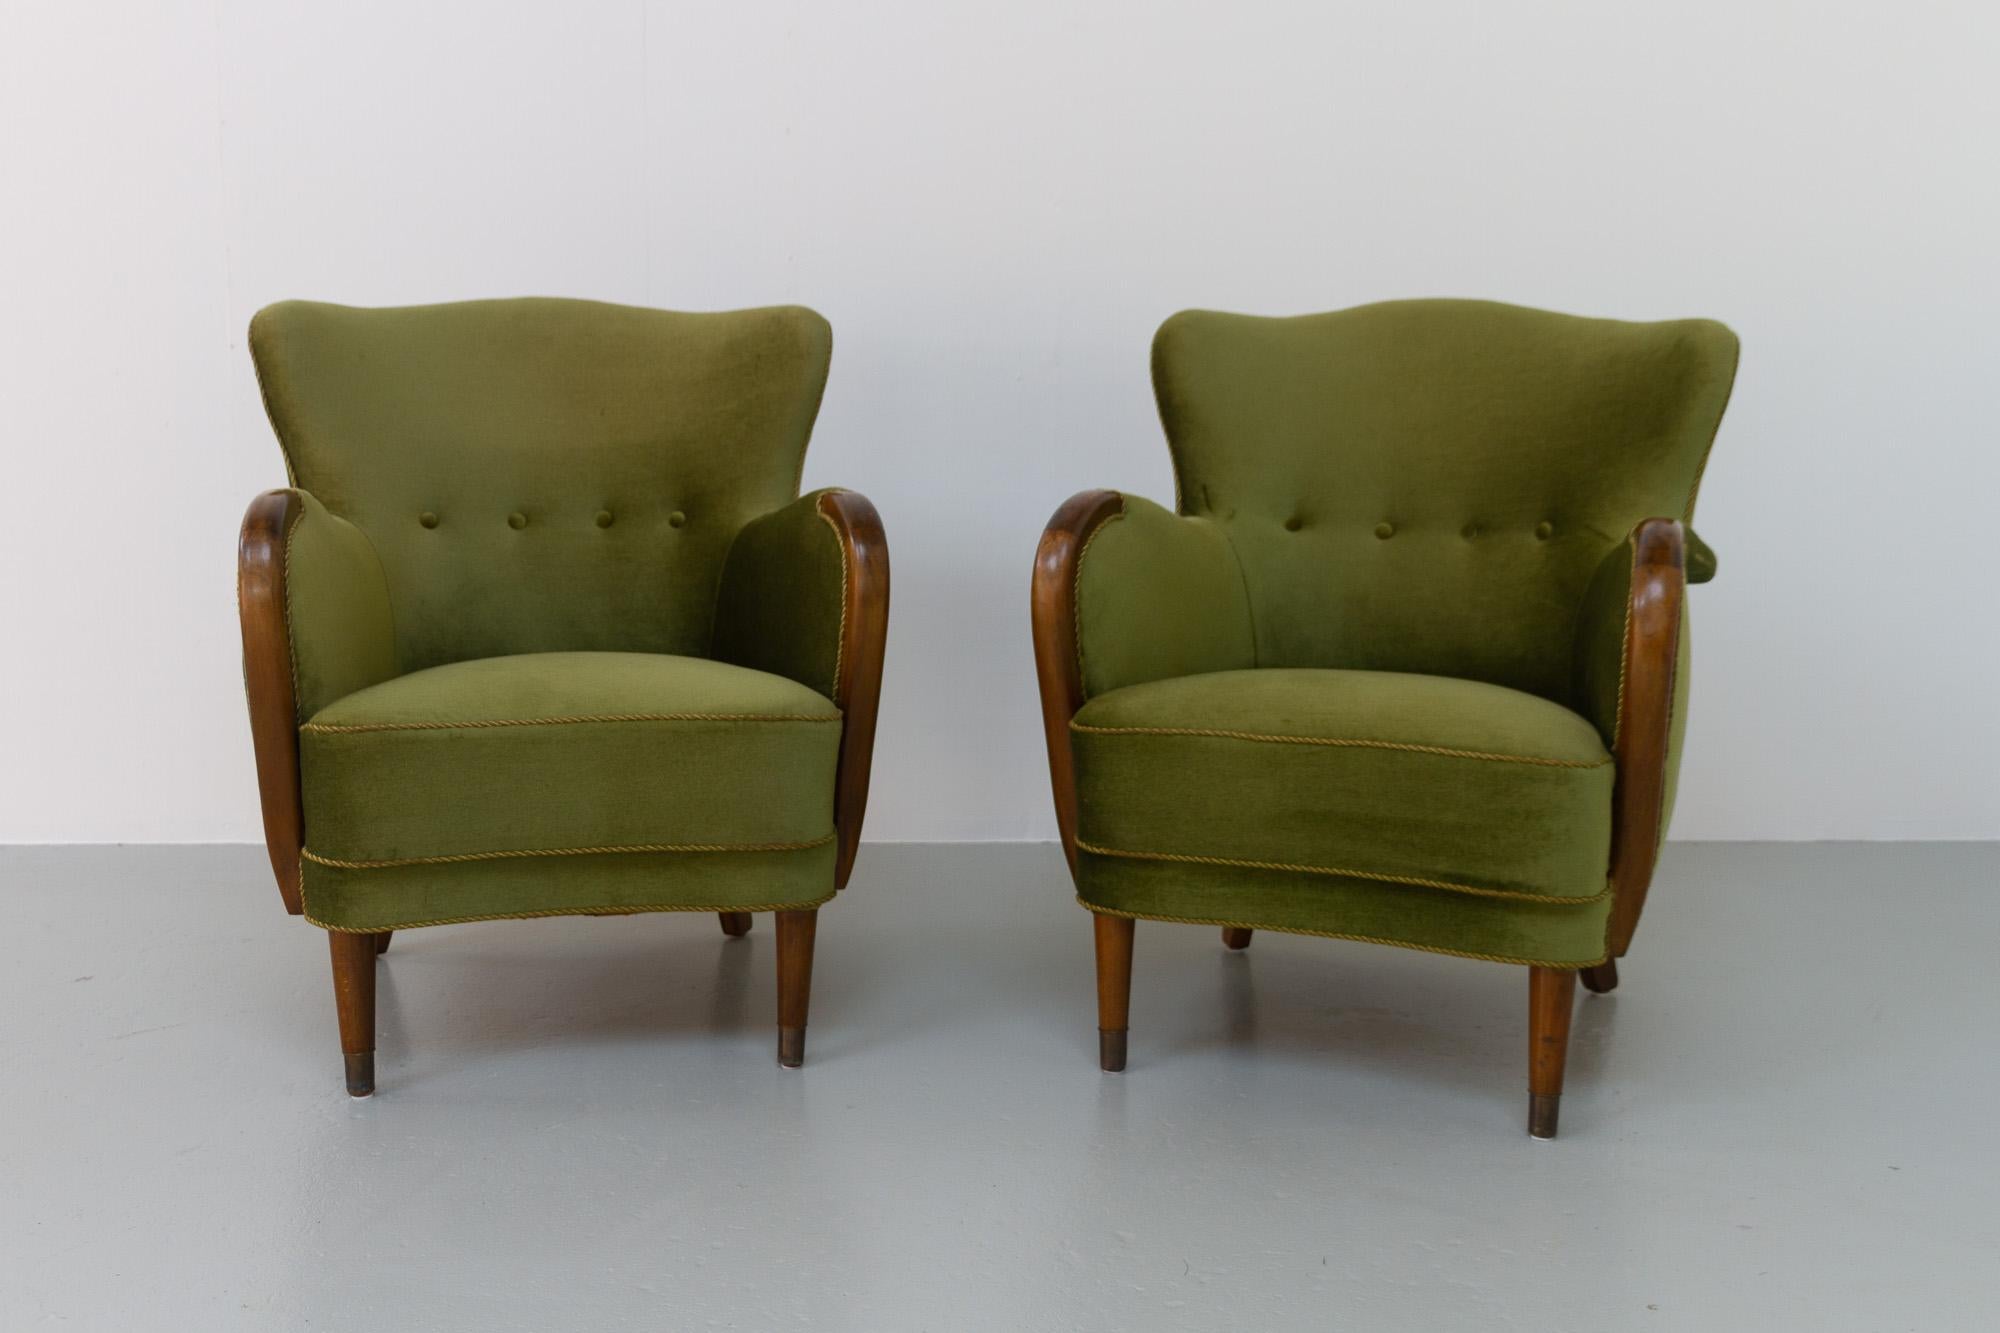 Vintage Danish Emerald Green Velvet Art Deco Lounge Chairs, 1940s. Set of 2.
Pair of vintage Art Deco club chairs upholstered in stunning emerald green mohair velvet made by cabinetmaker in Denmark in the 1940s. Original coil springs and newer